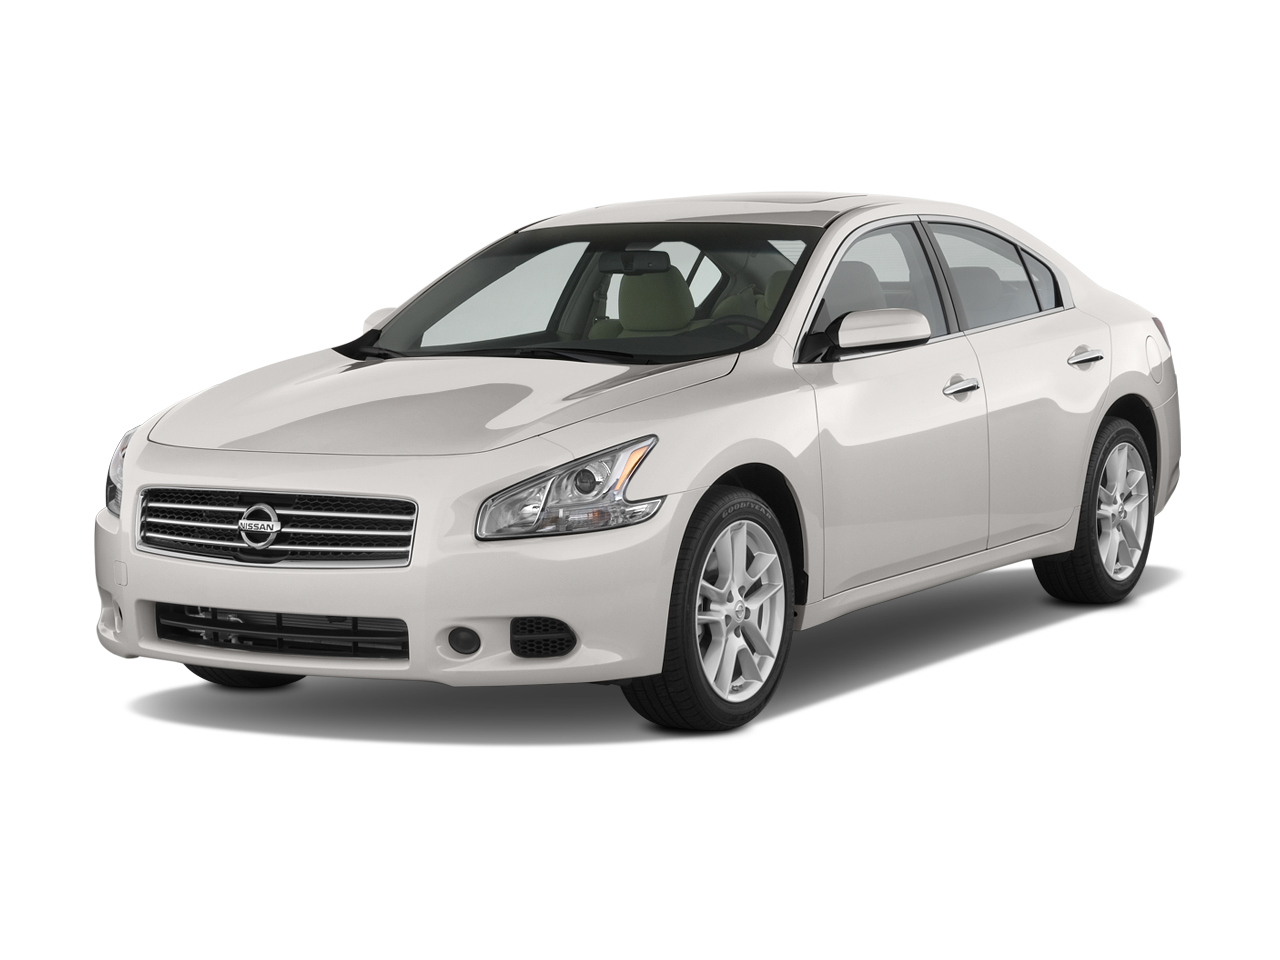 2011 Nissan Maxima Review Ratings Specs Prices And